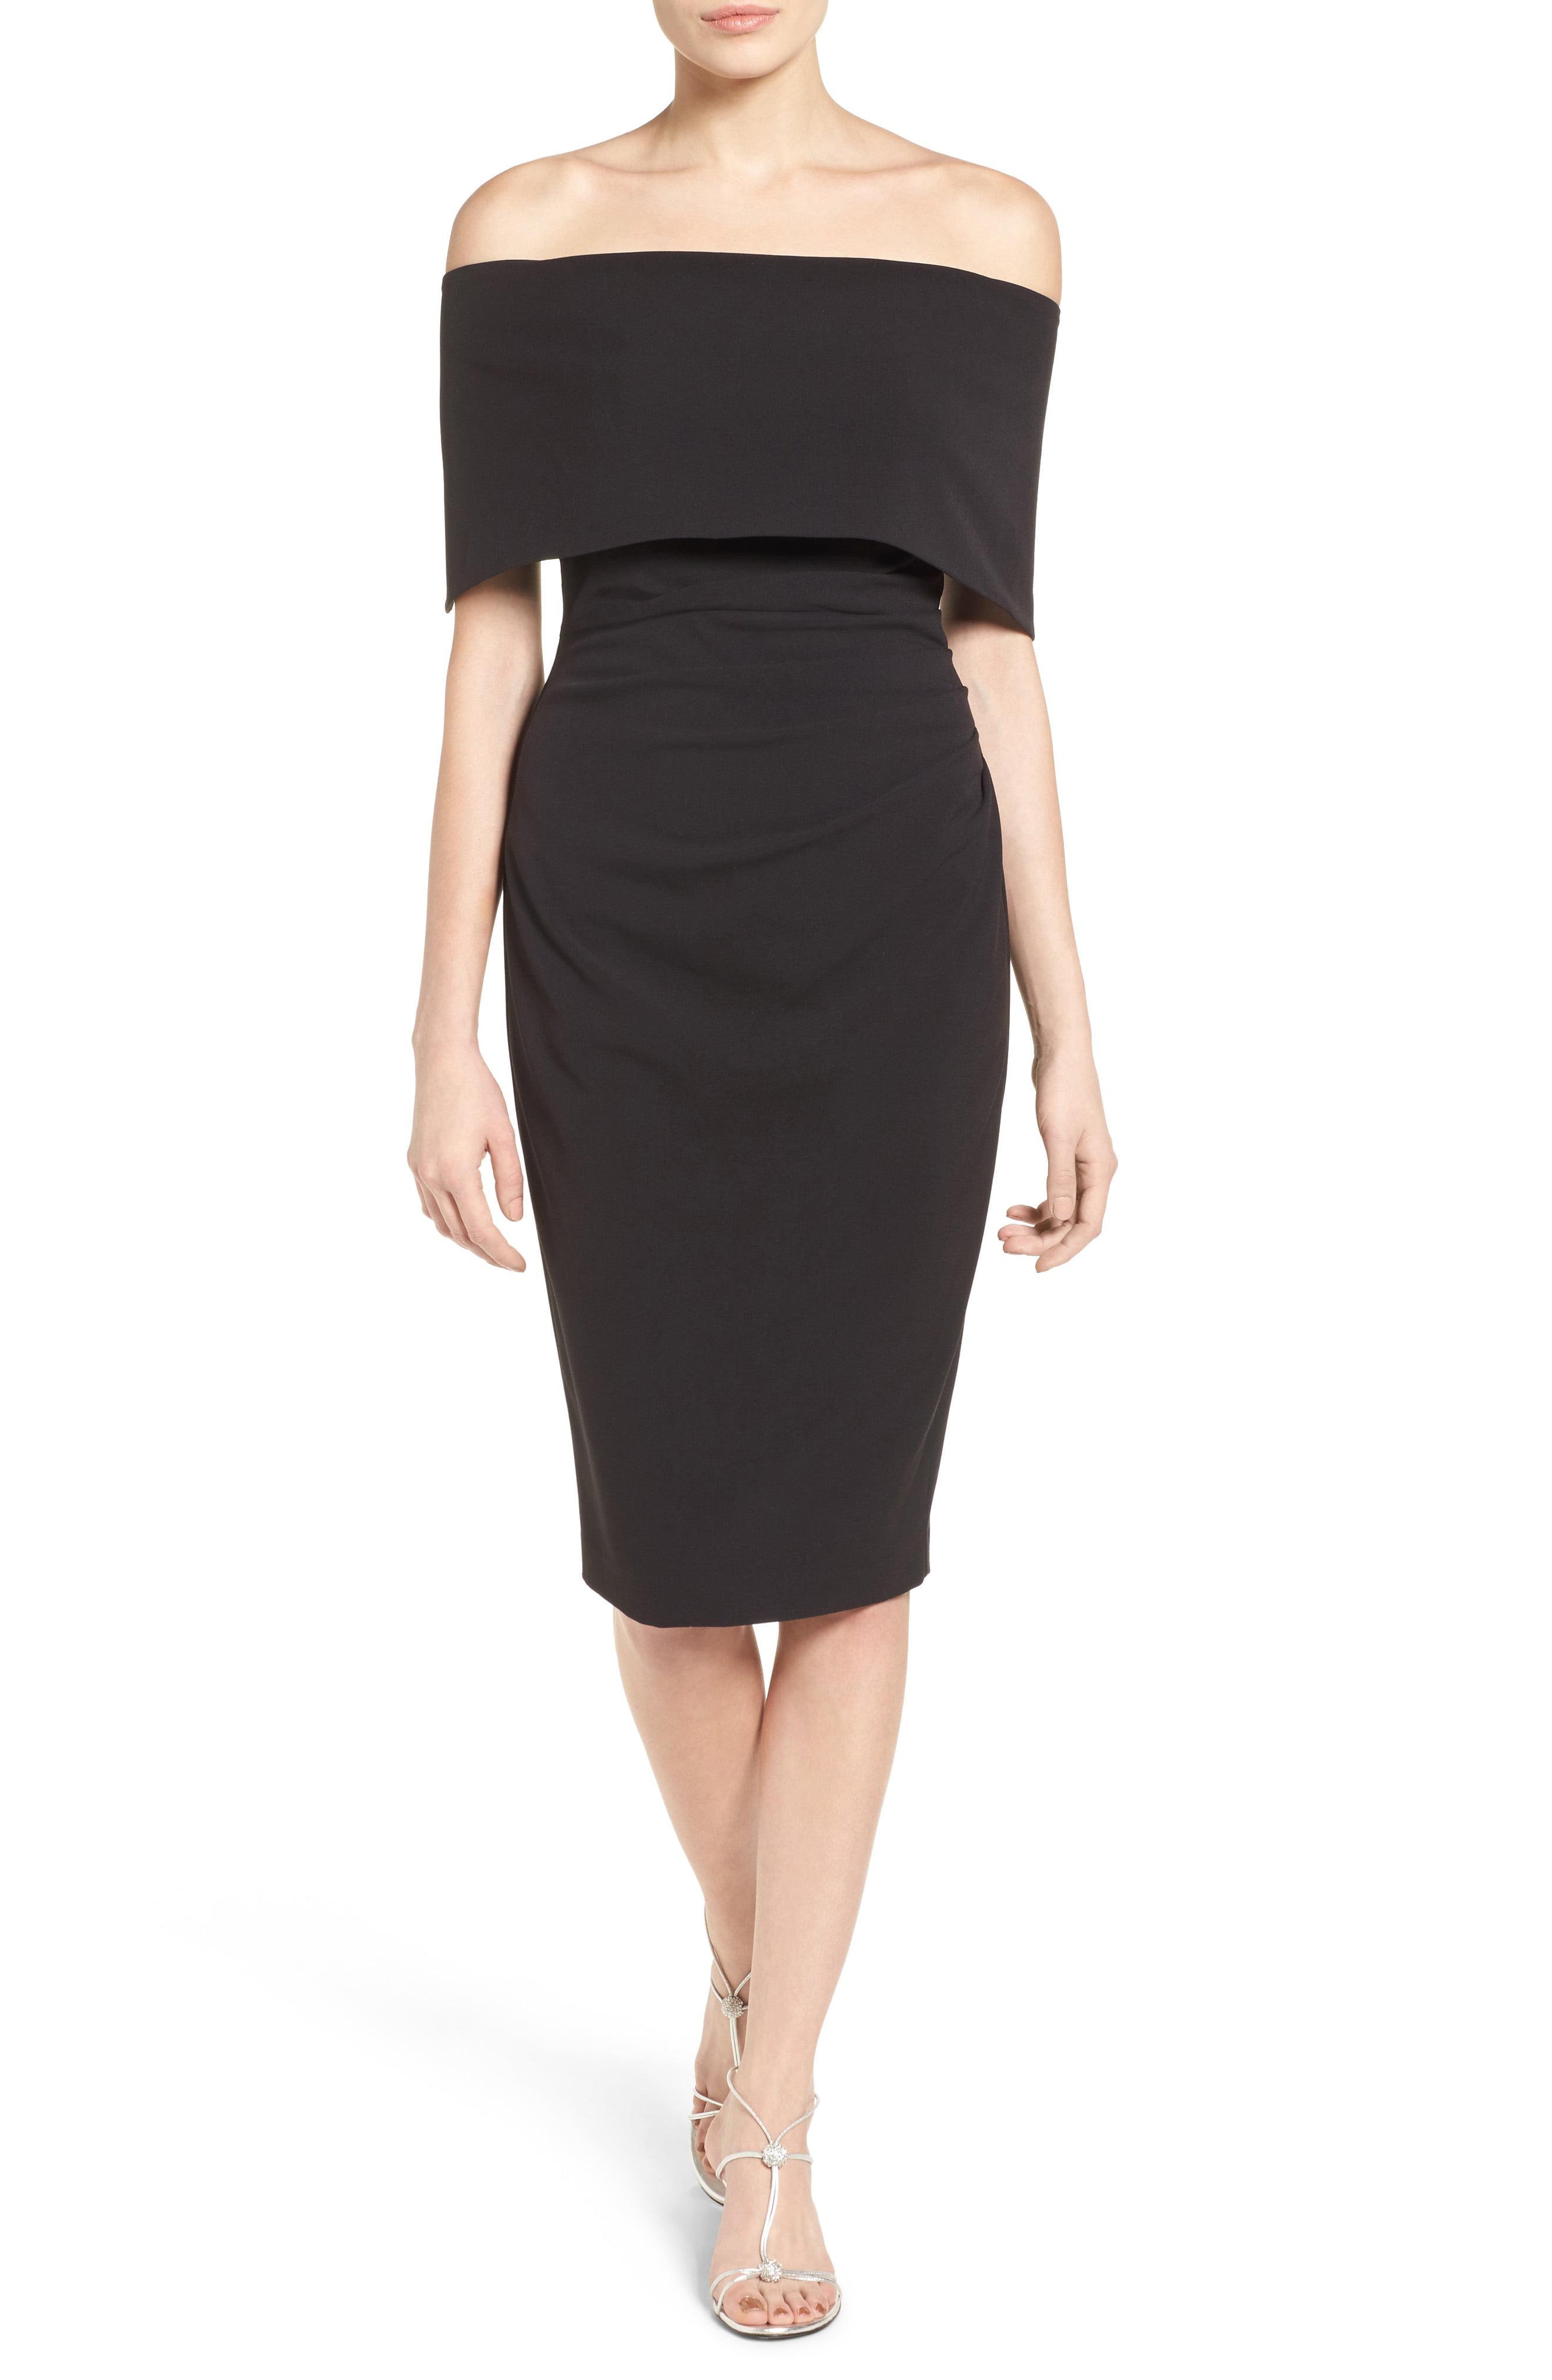 Vince Camuto Popover Cocktail Dress in Black - Lyst